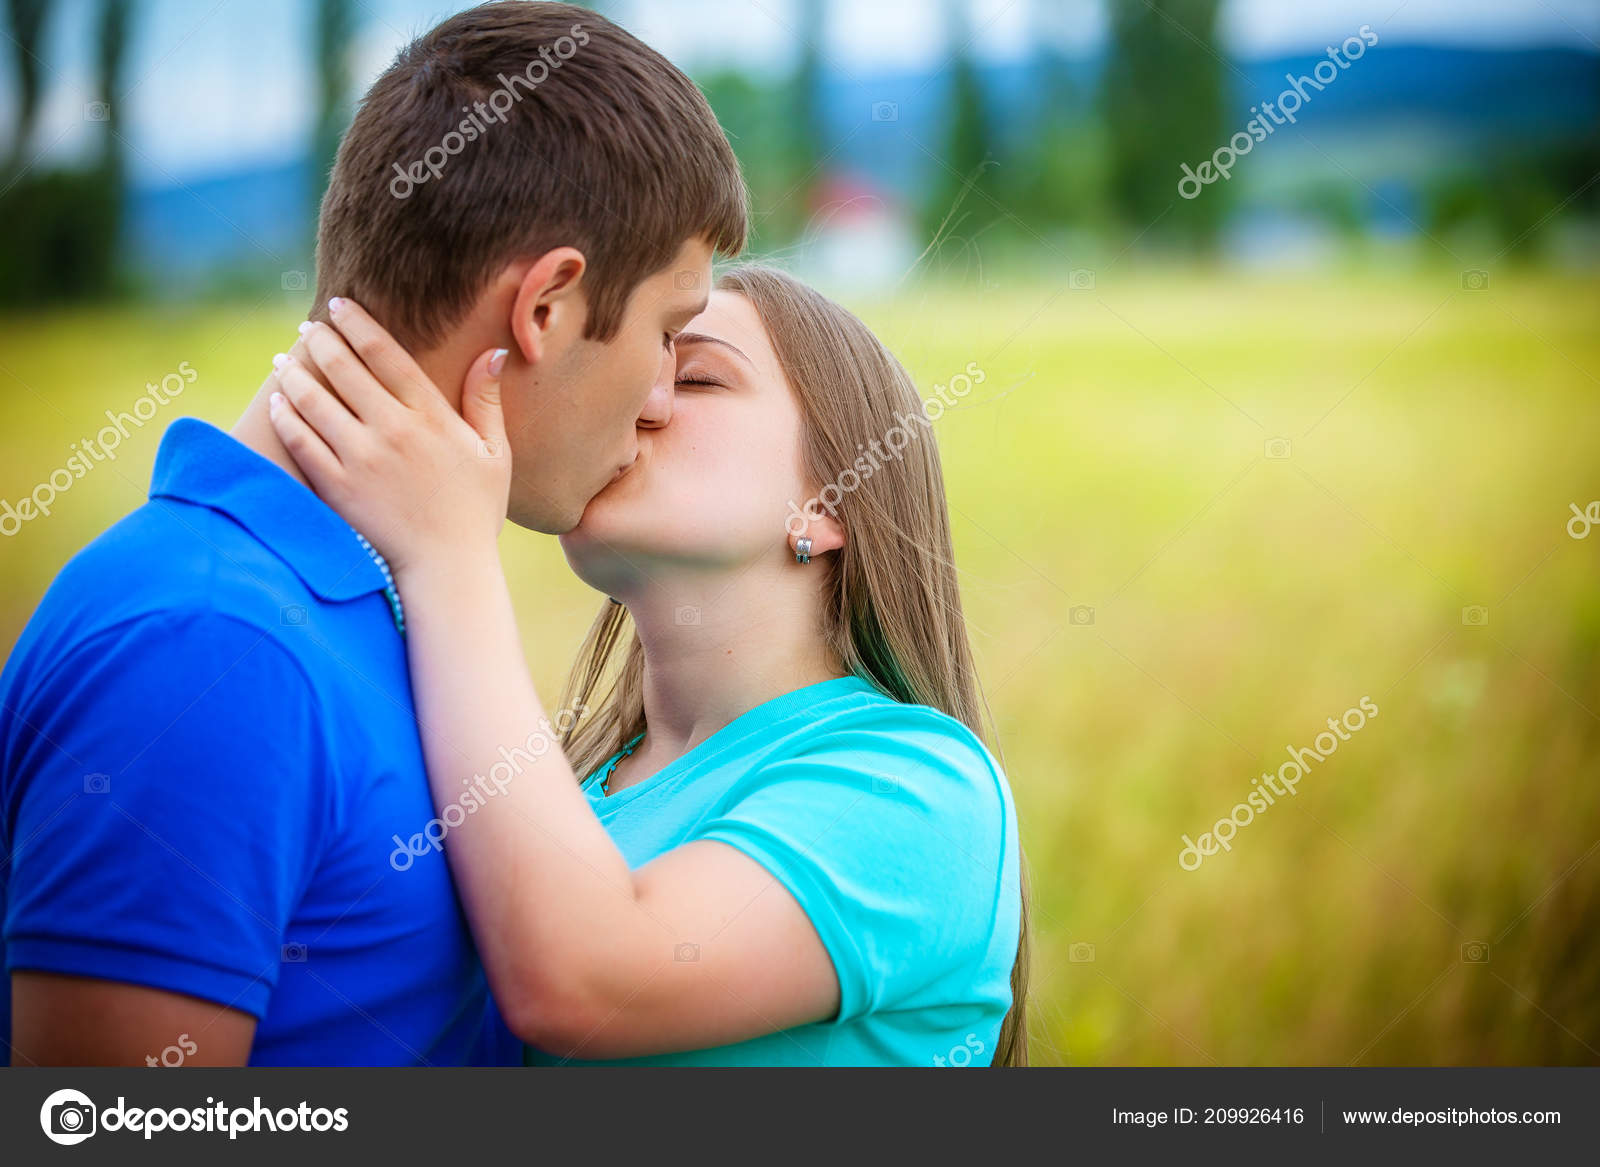 Couple kissing Stock Photos, Royalty Free Couple kissing Images |  Depositphotos